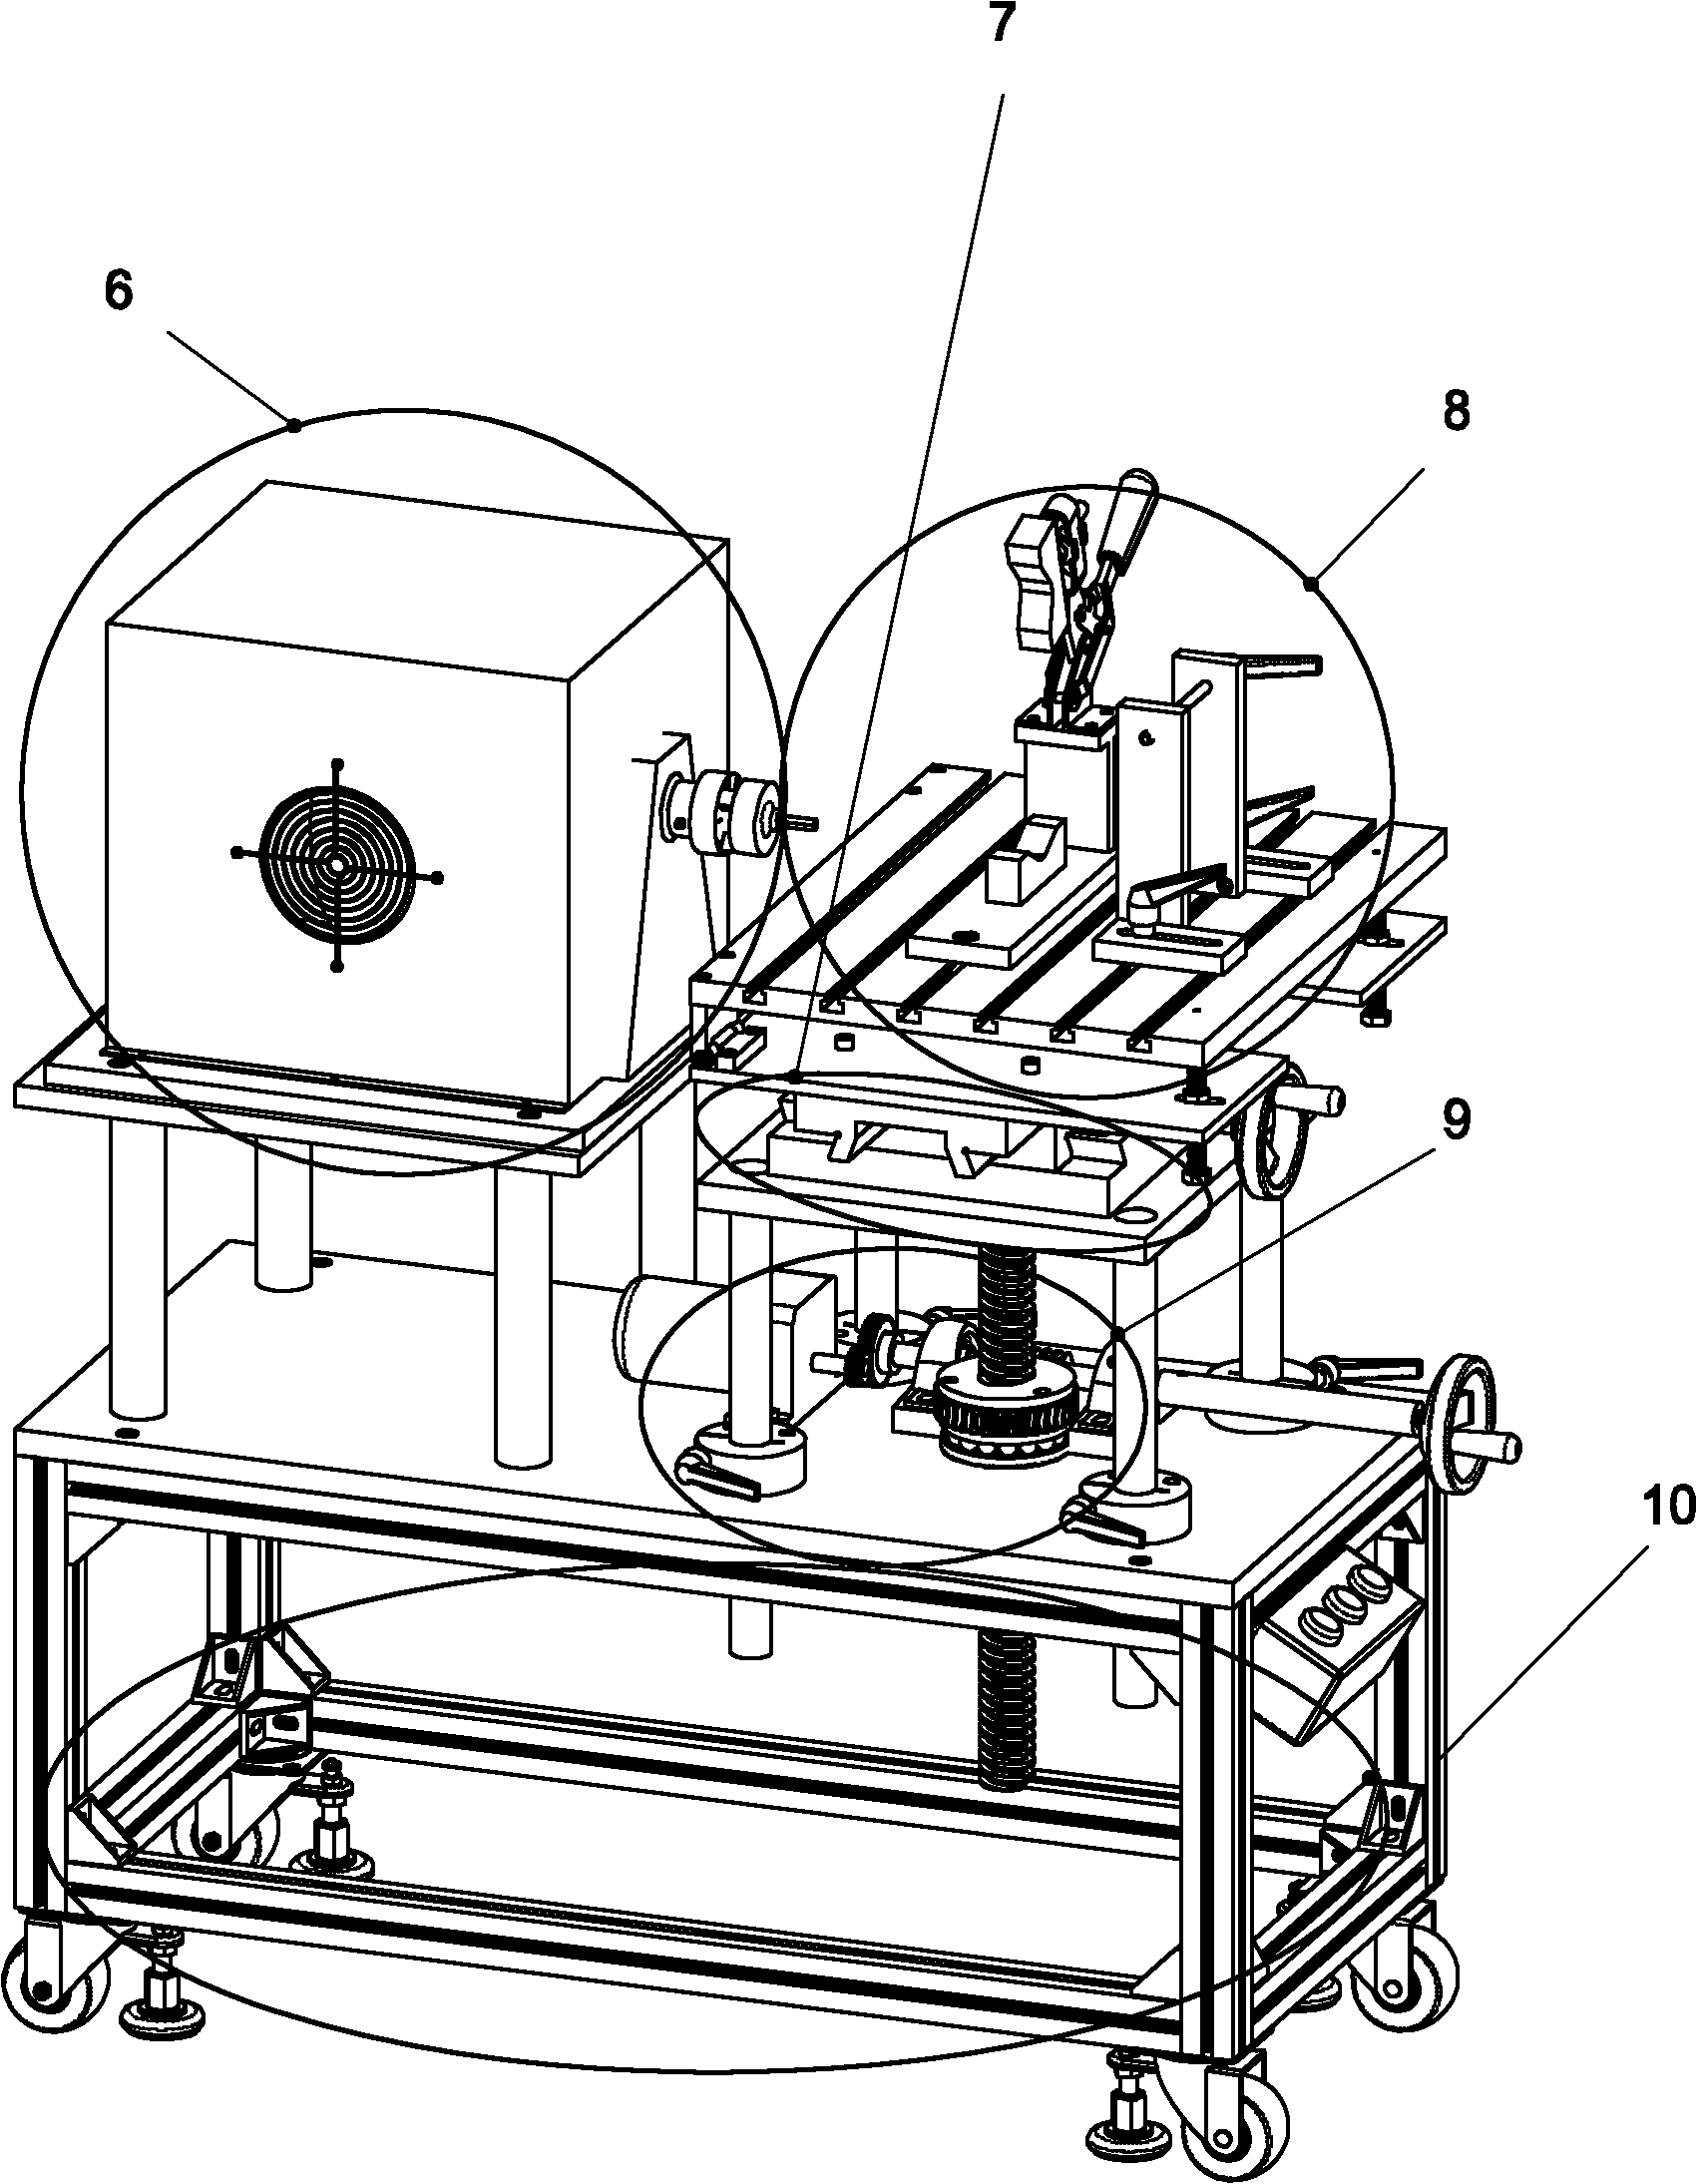 System for testing load durability of handheld electric tool and special test rack thereof